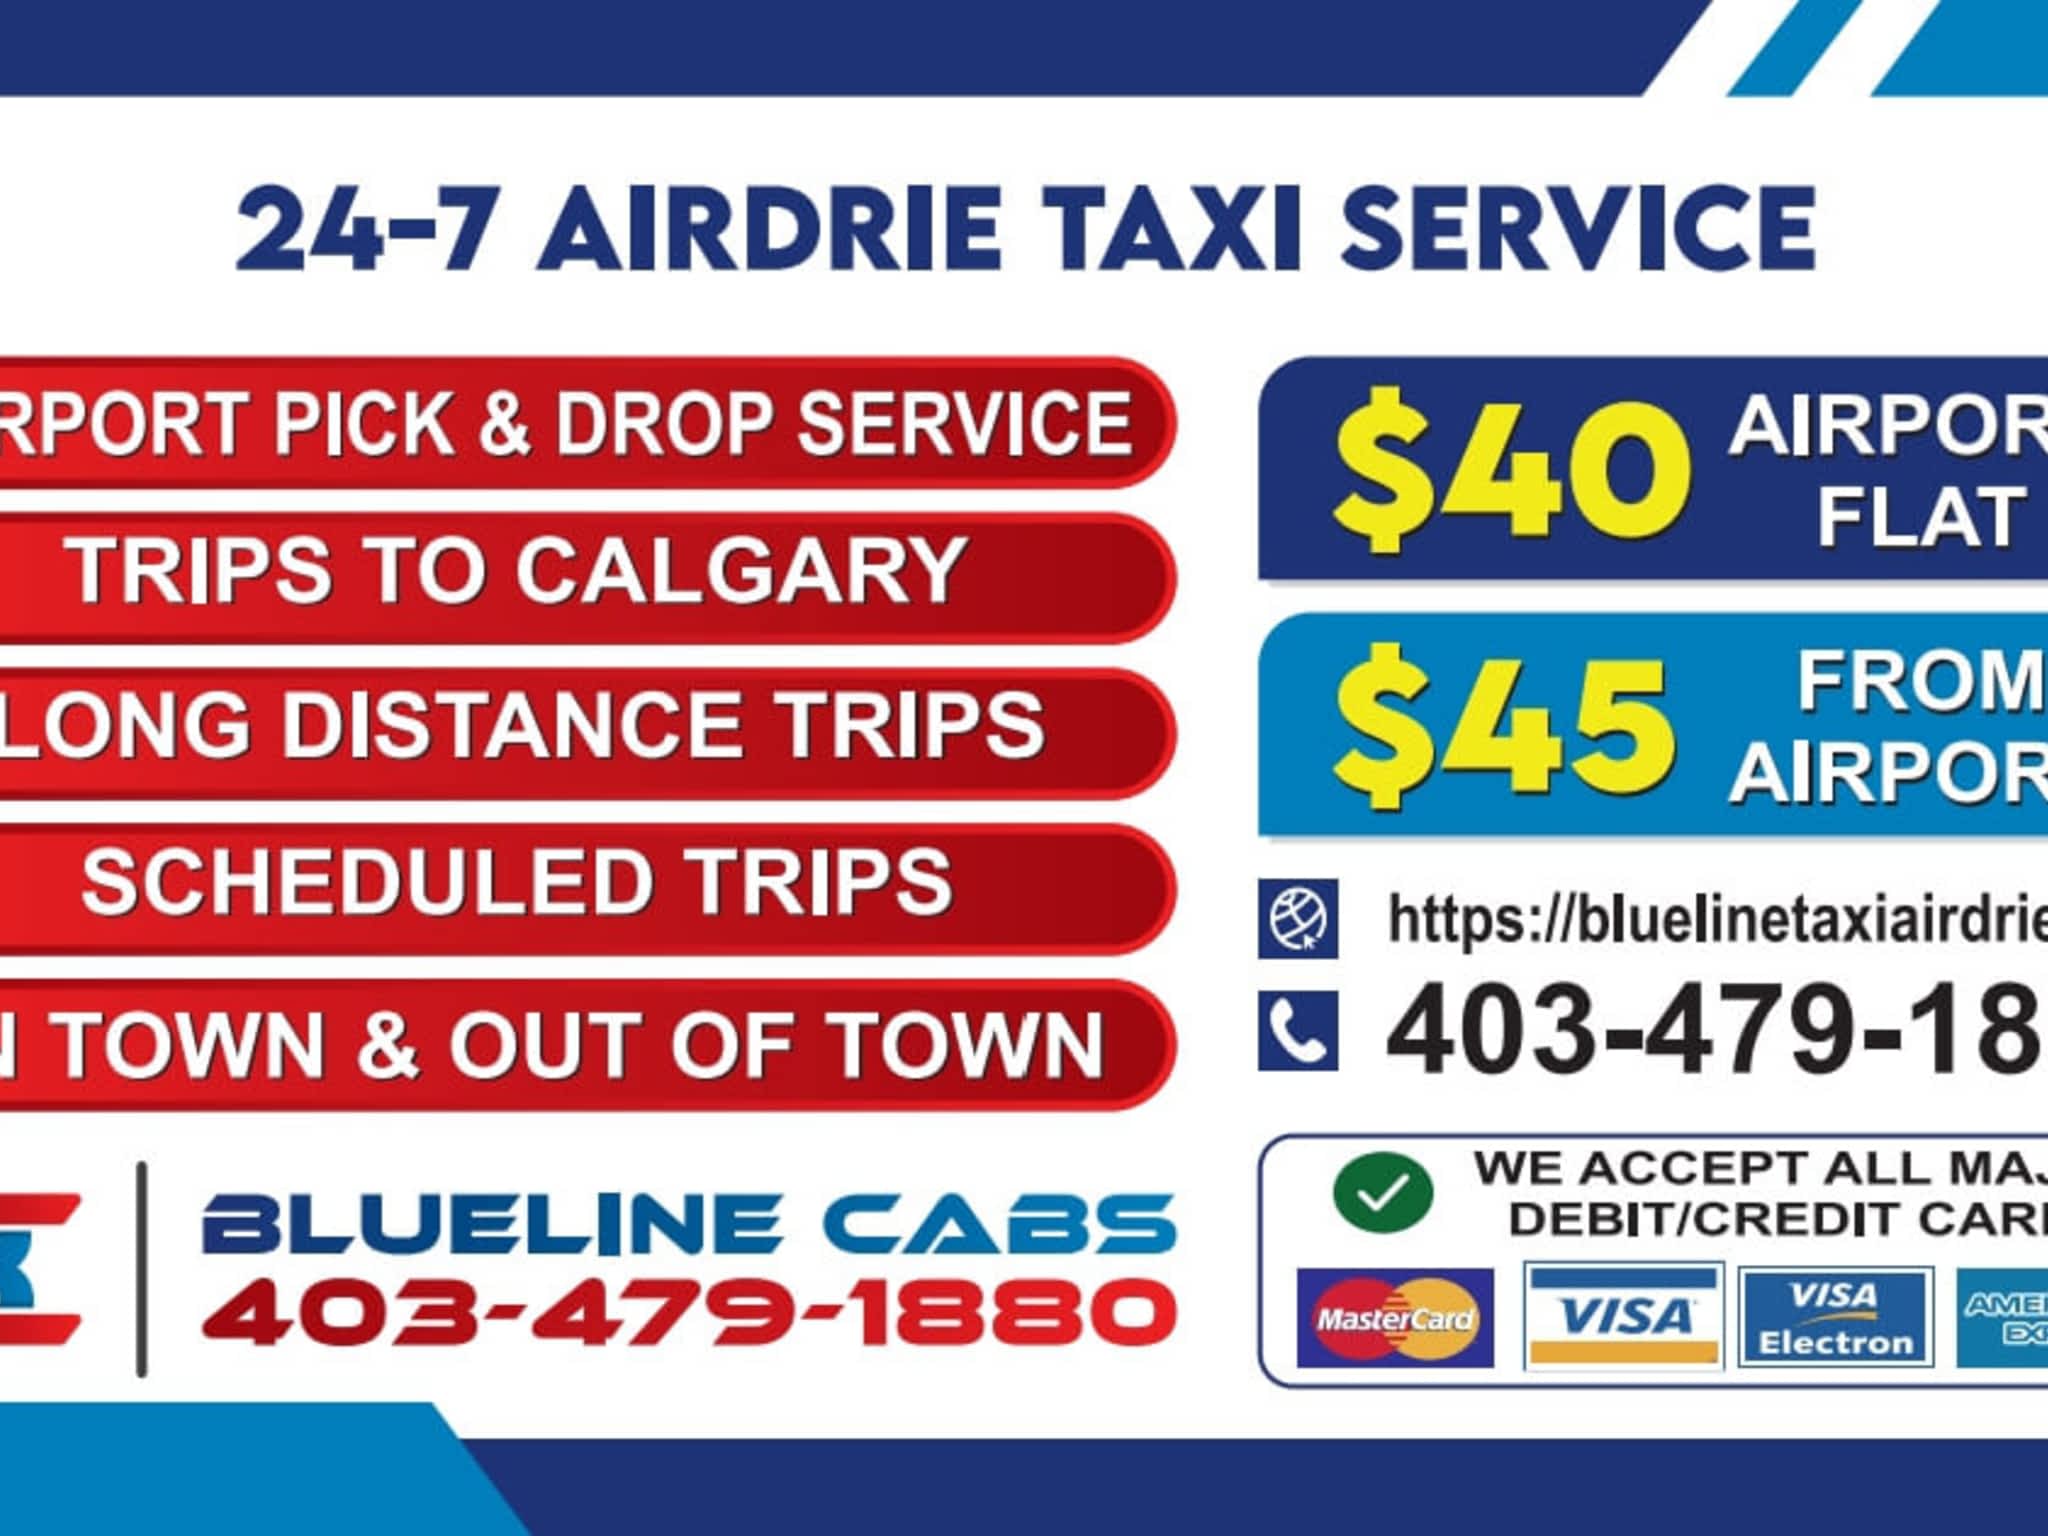 photo Blueline Airdrie Taxi Cabs